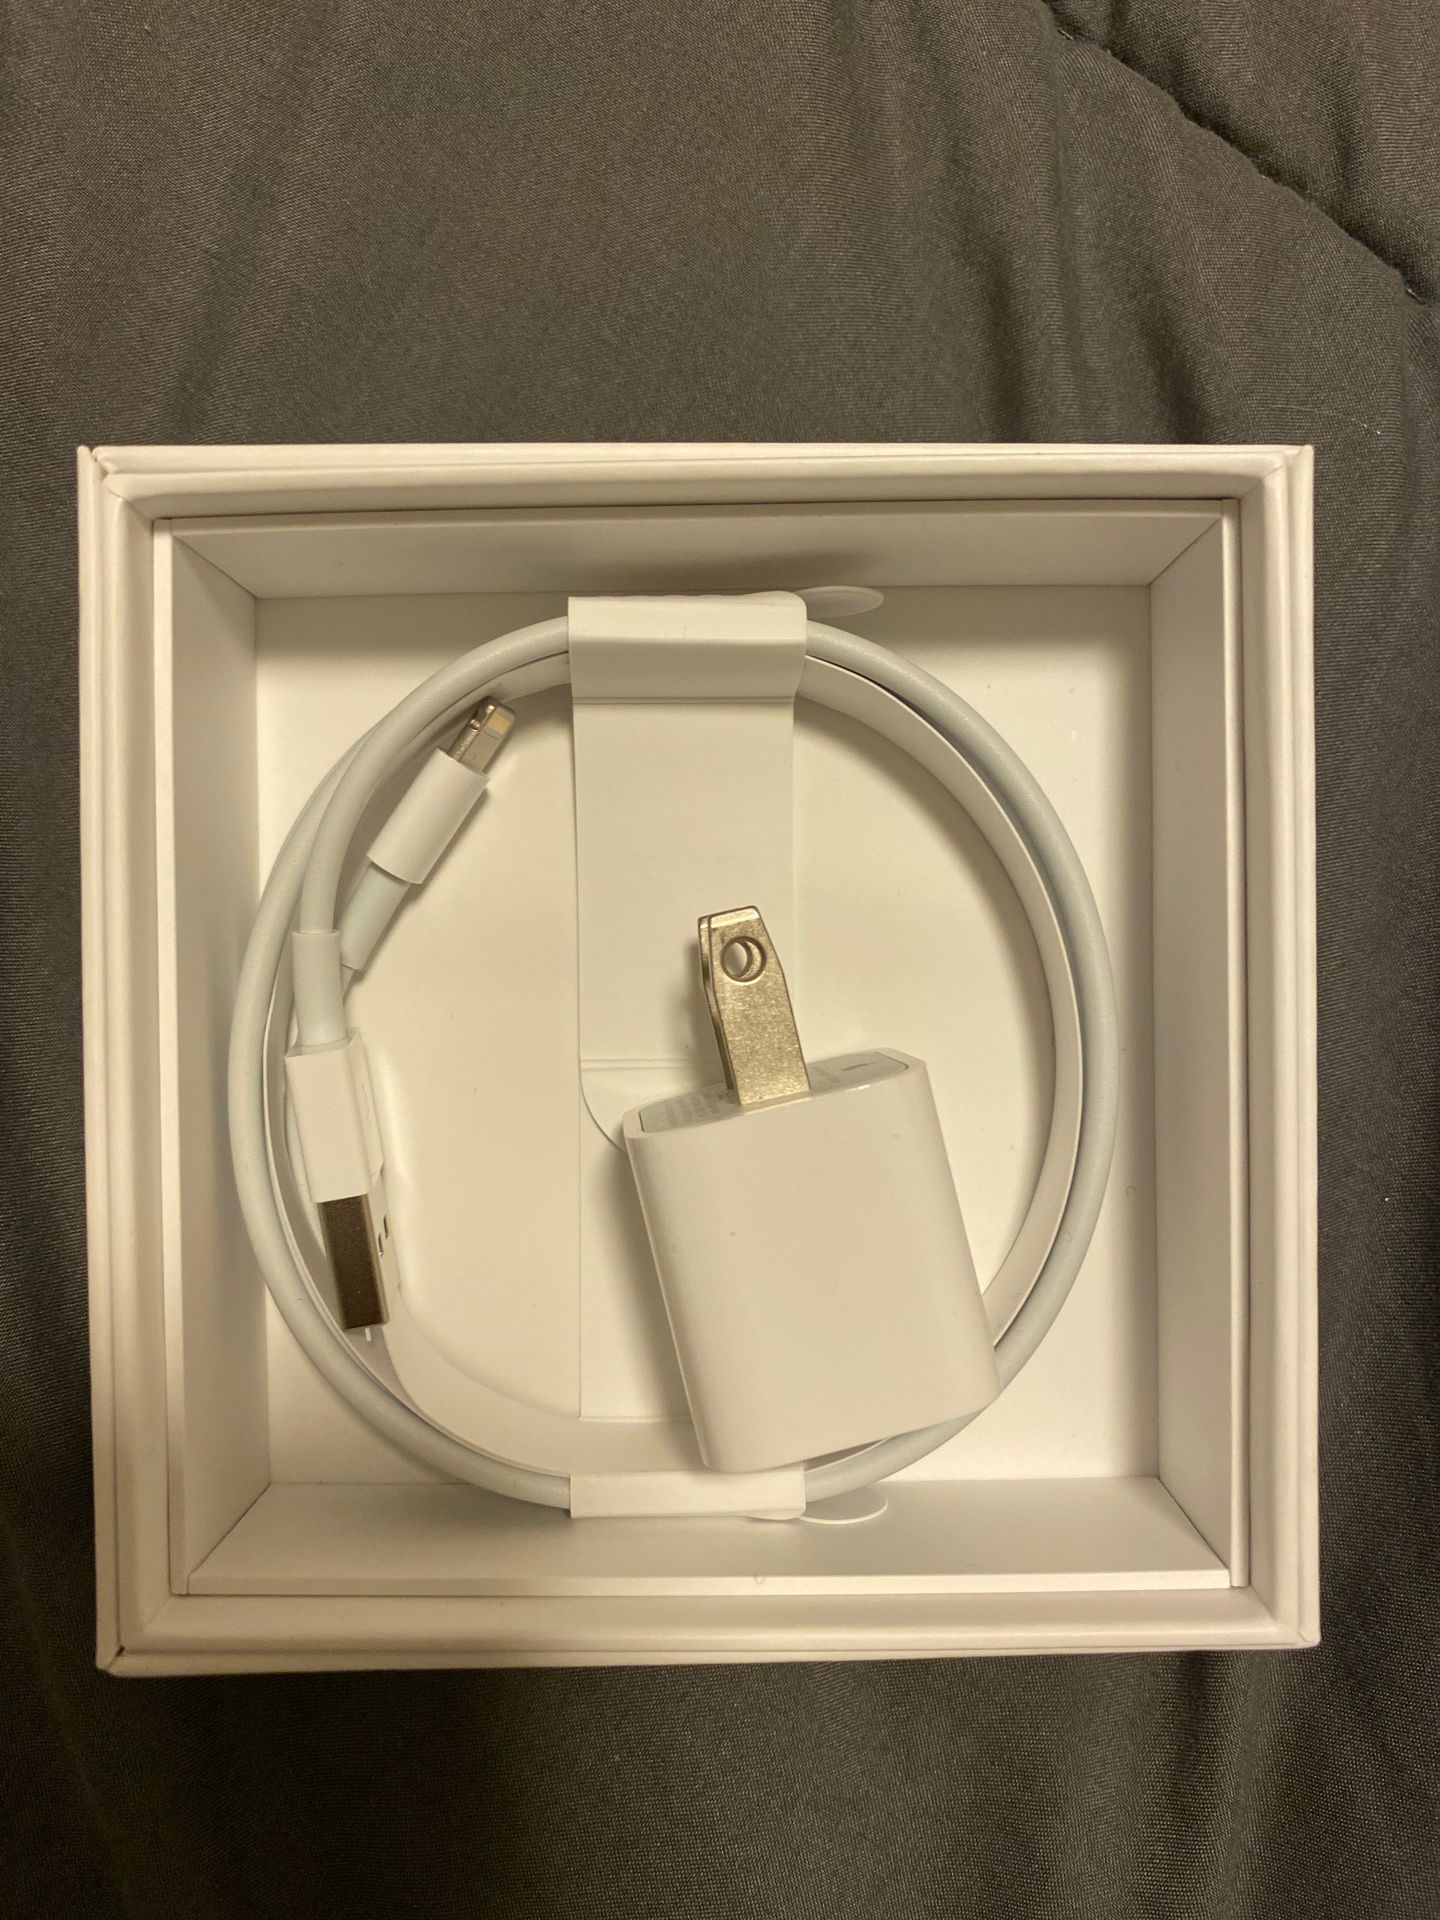 Iphone charger - brand new